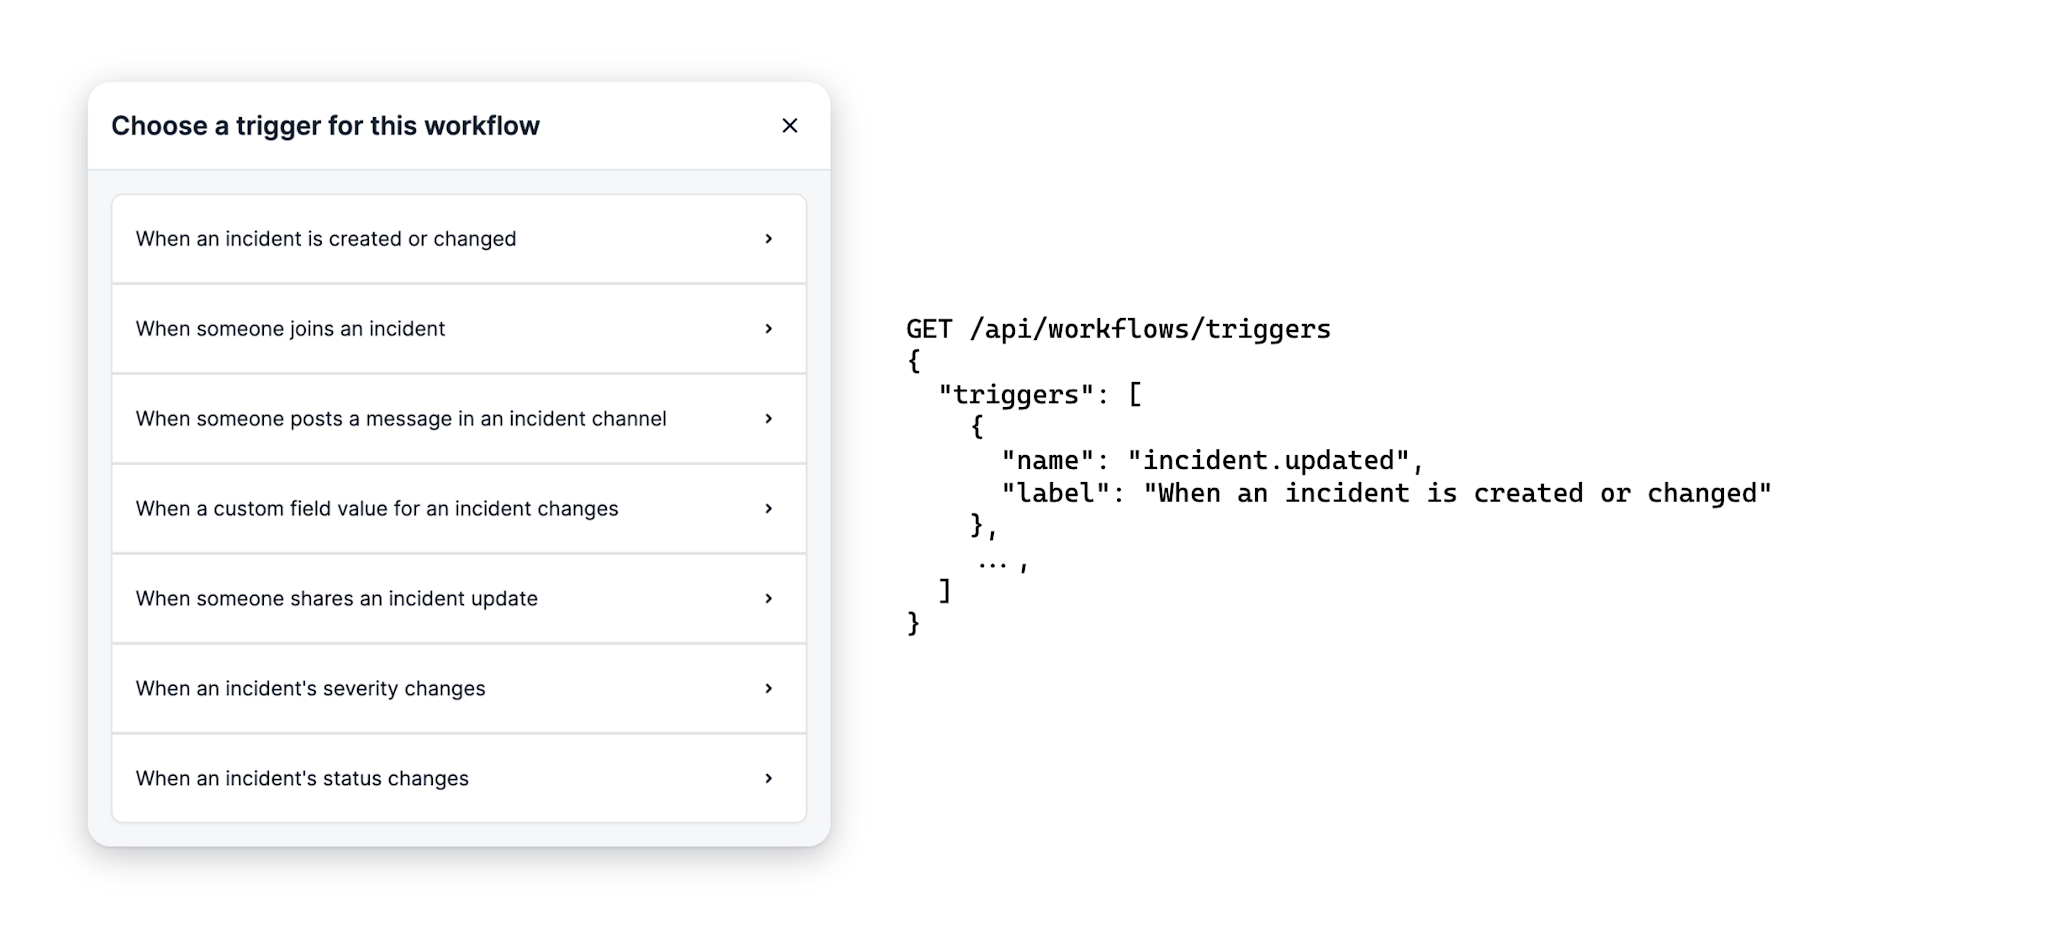 Showing the list of workflow triggers side-by-side with the trigger API results